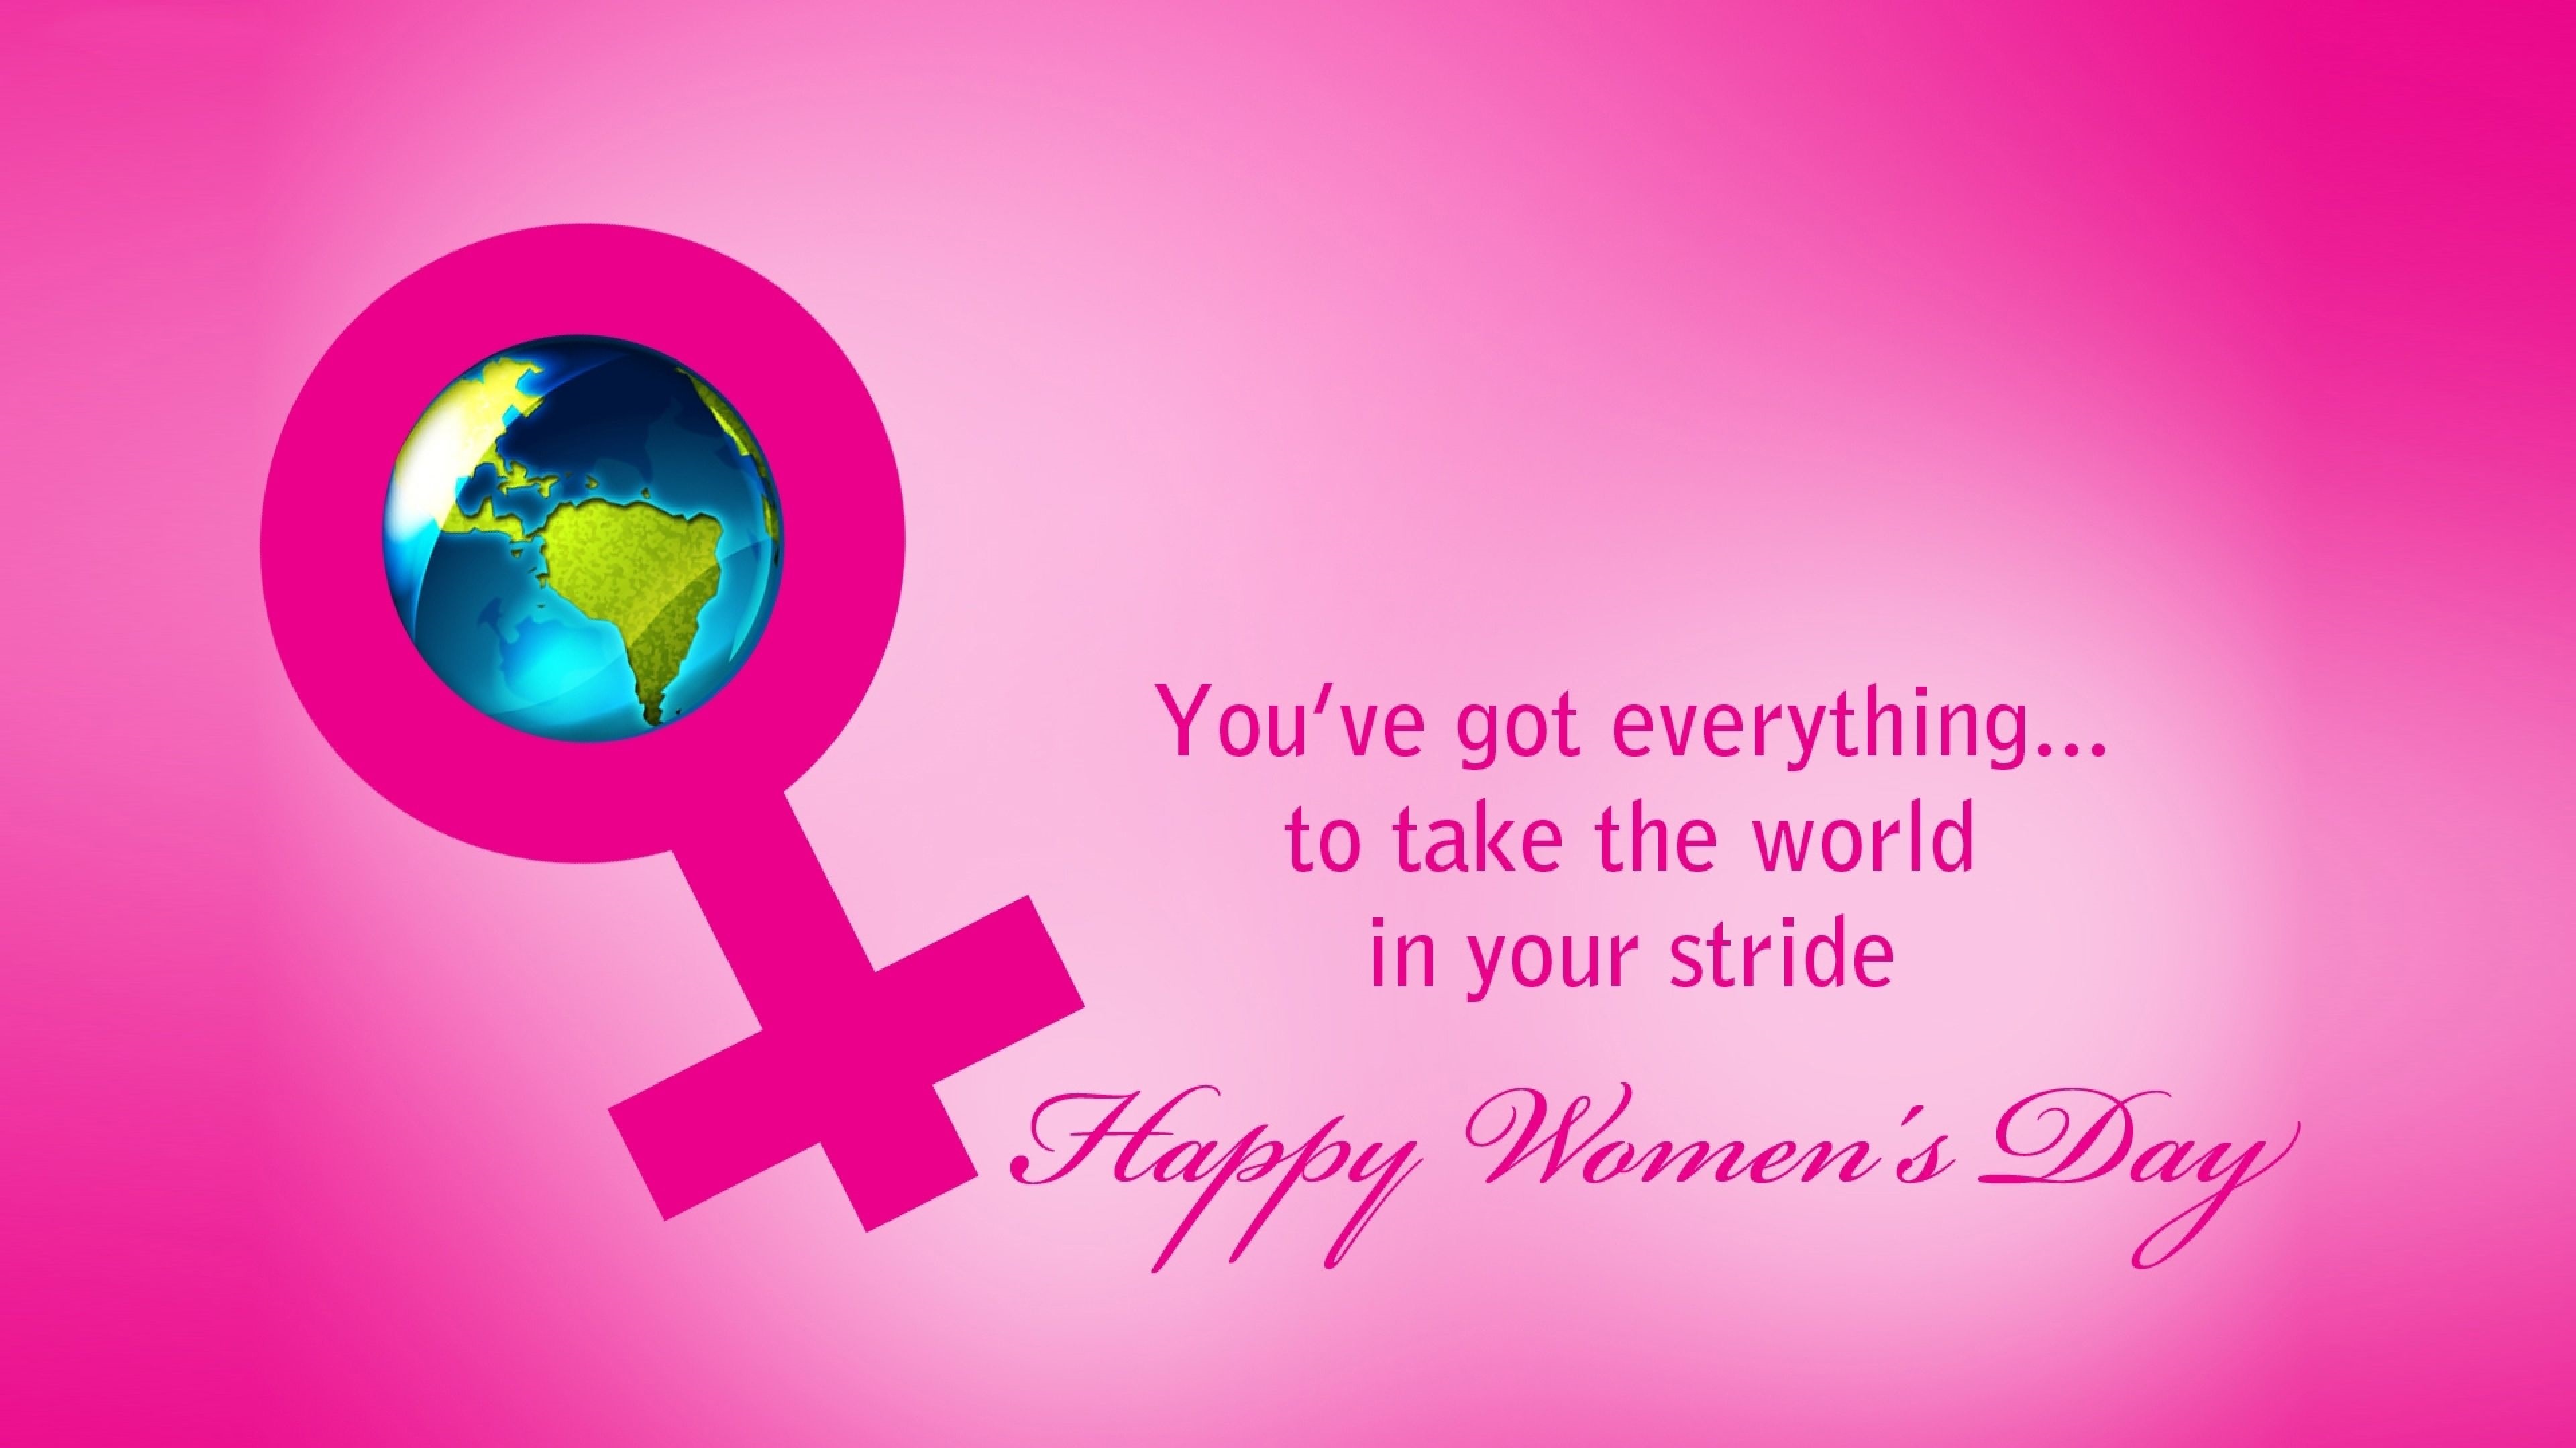 Happy Women's Day 2016 sms wishes quotes greetings (3)